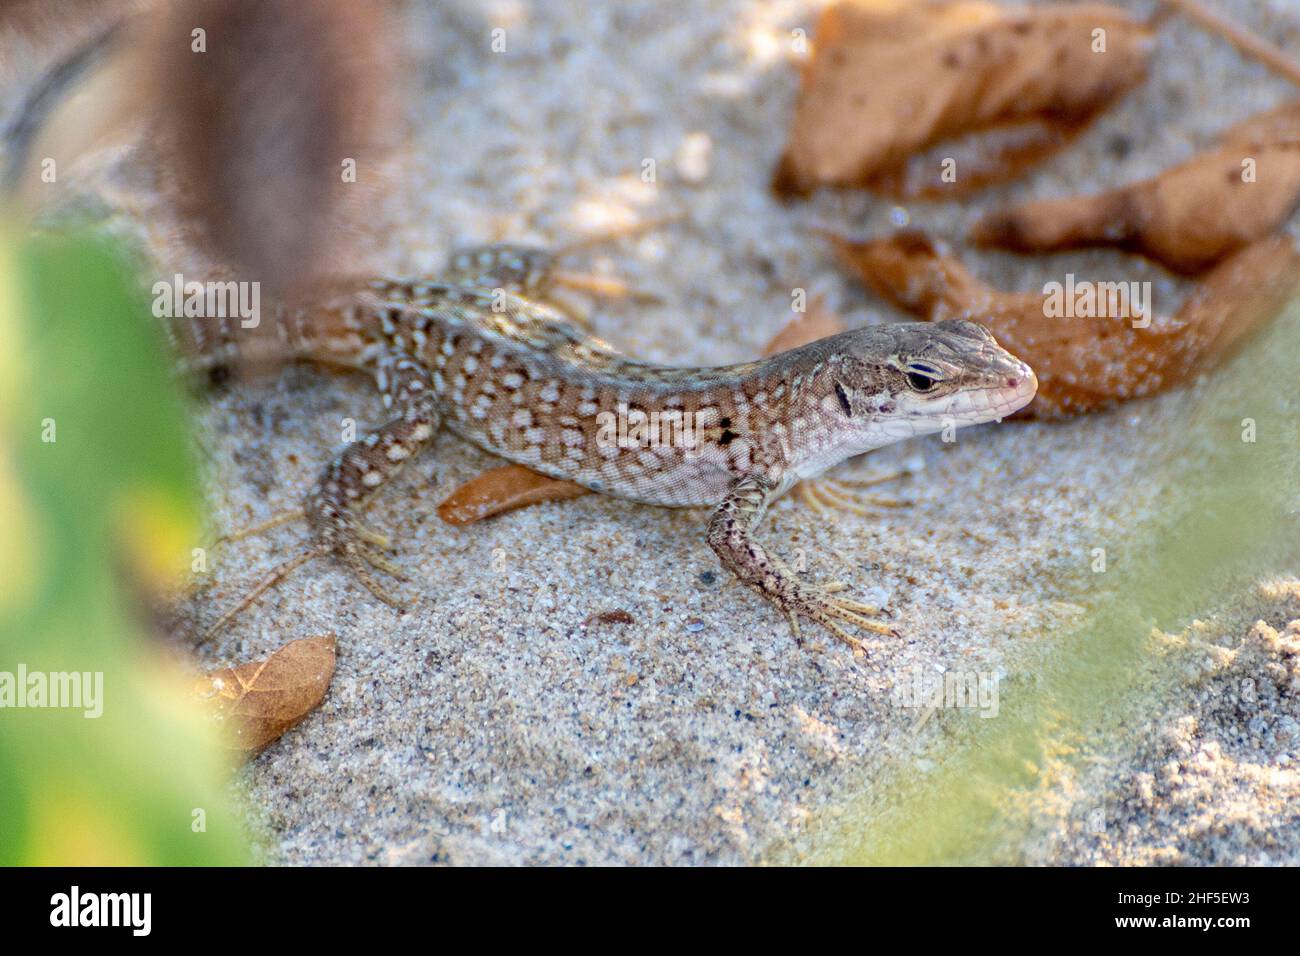 Lizard in the foreground among the shrubs Stock Photo